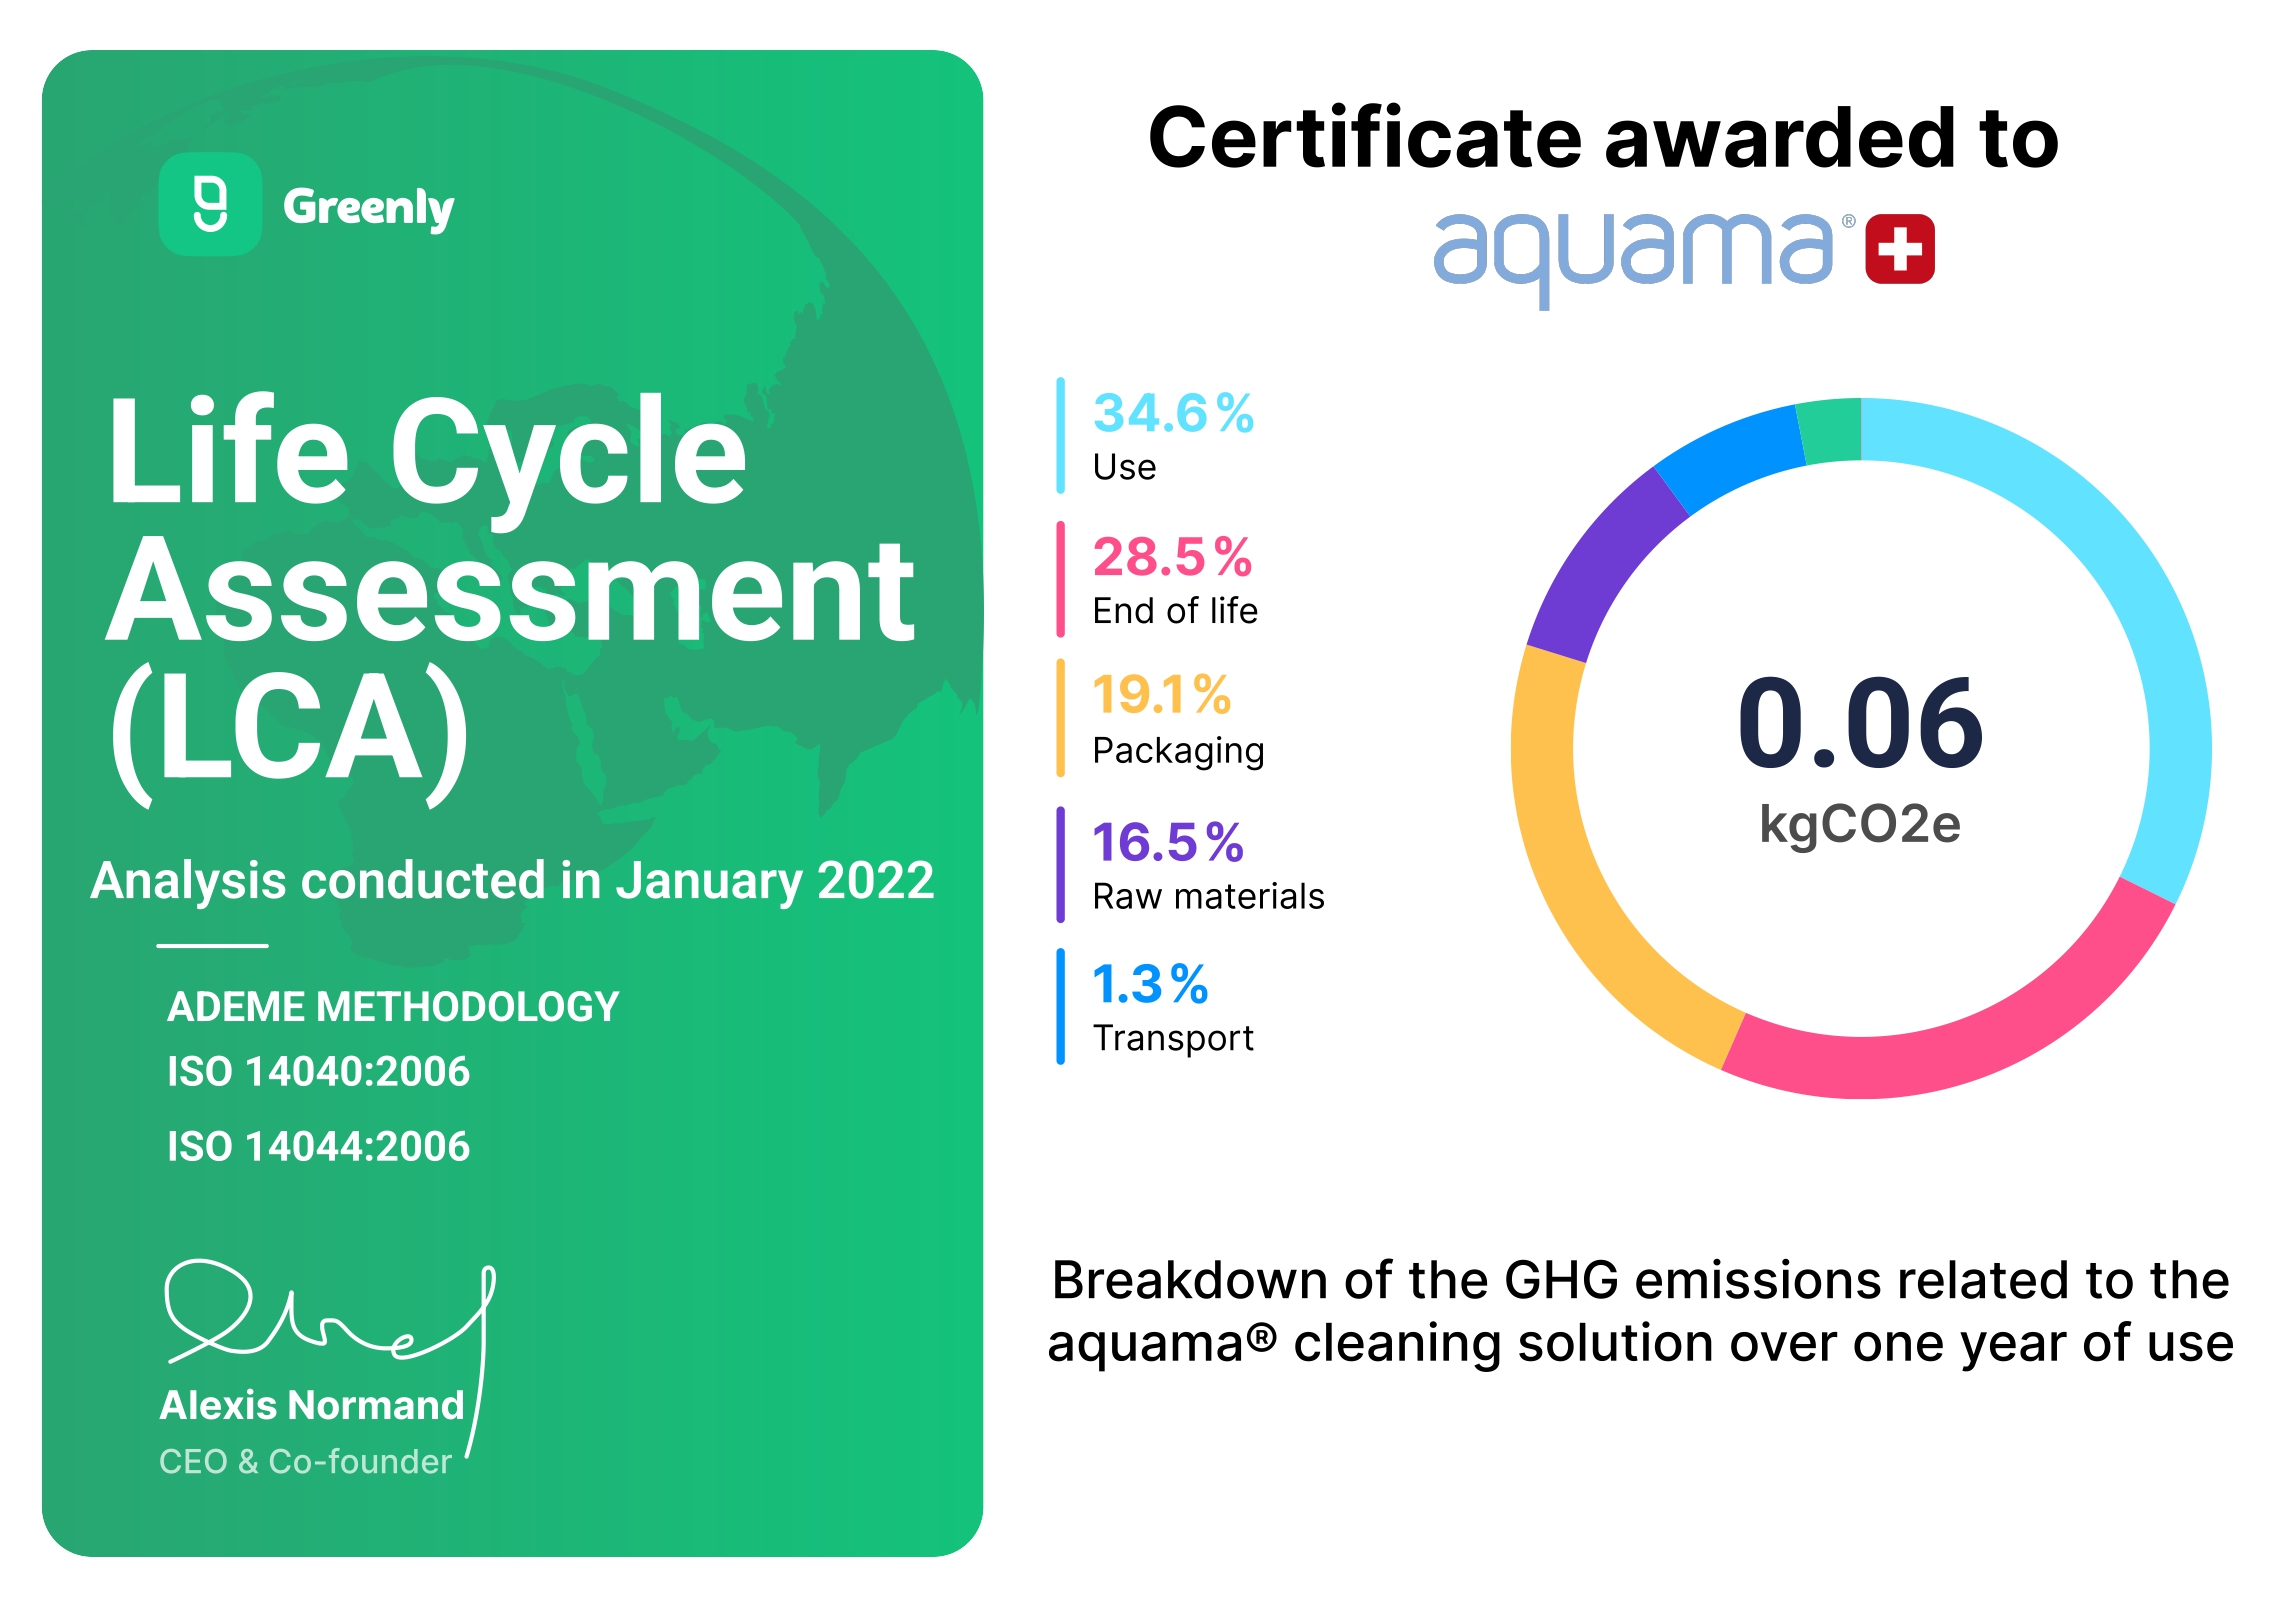 Distribution of emissions from the aquama® cleaning solution for one year of use